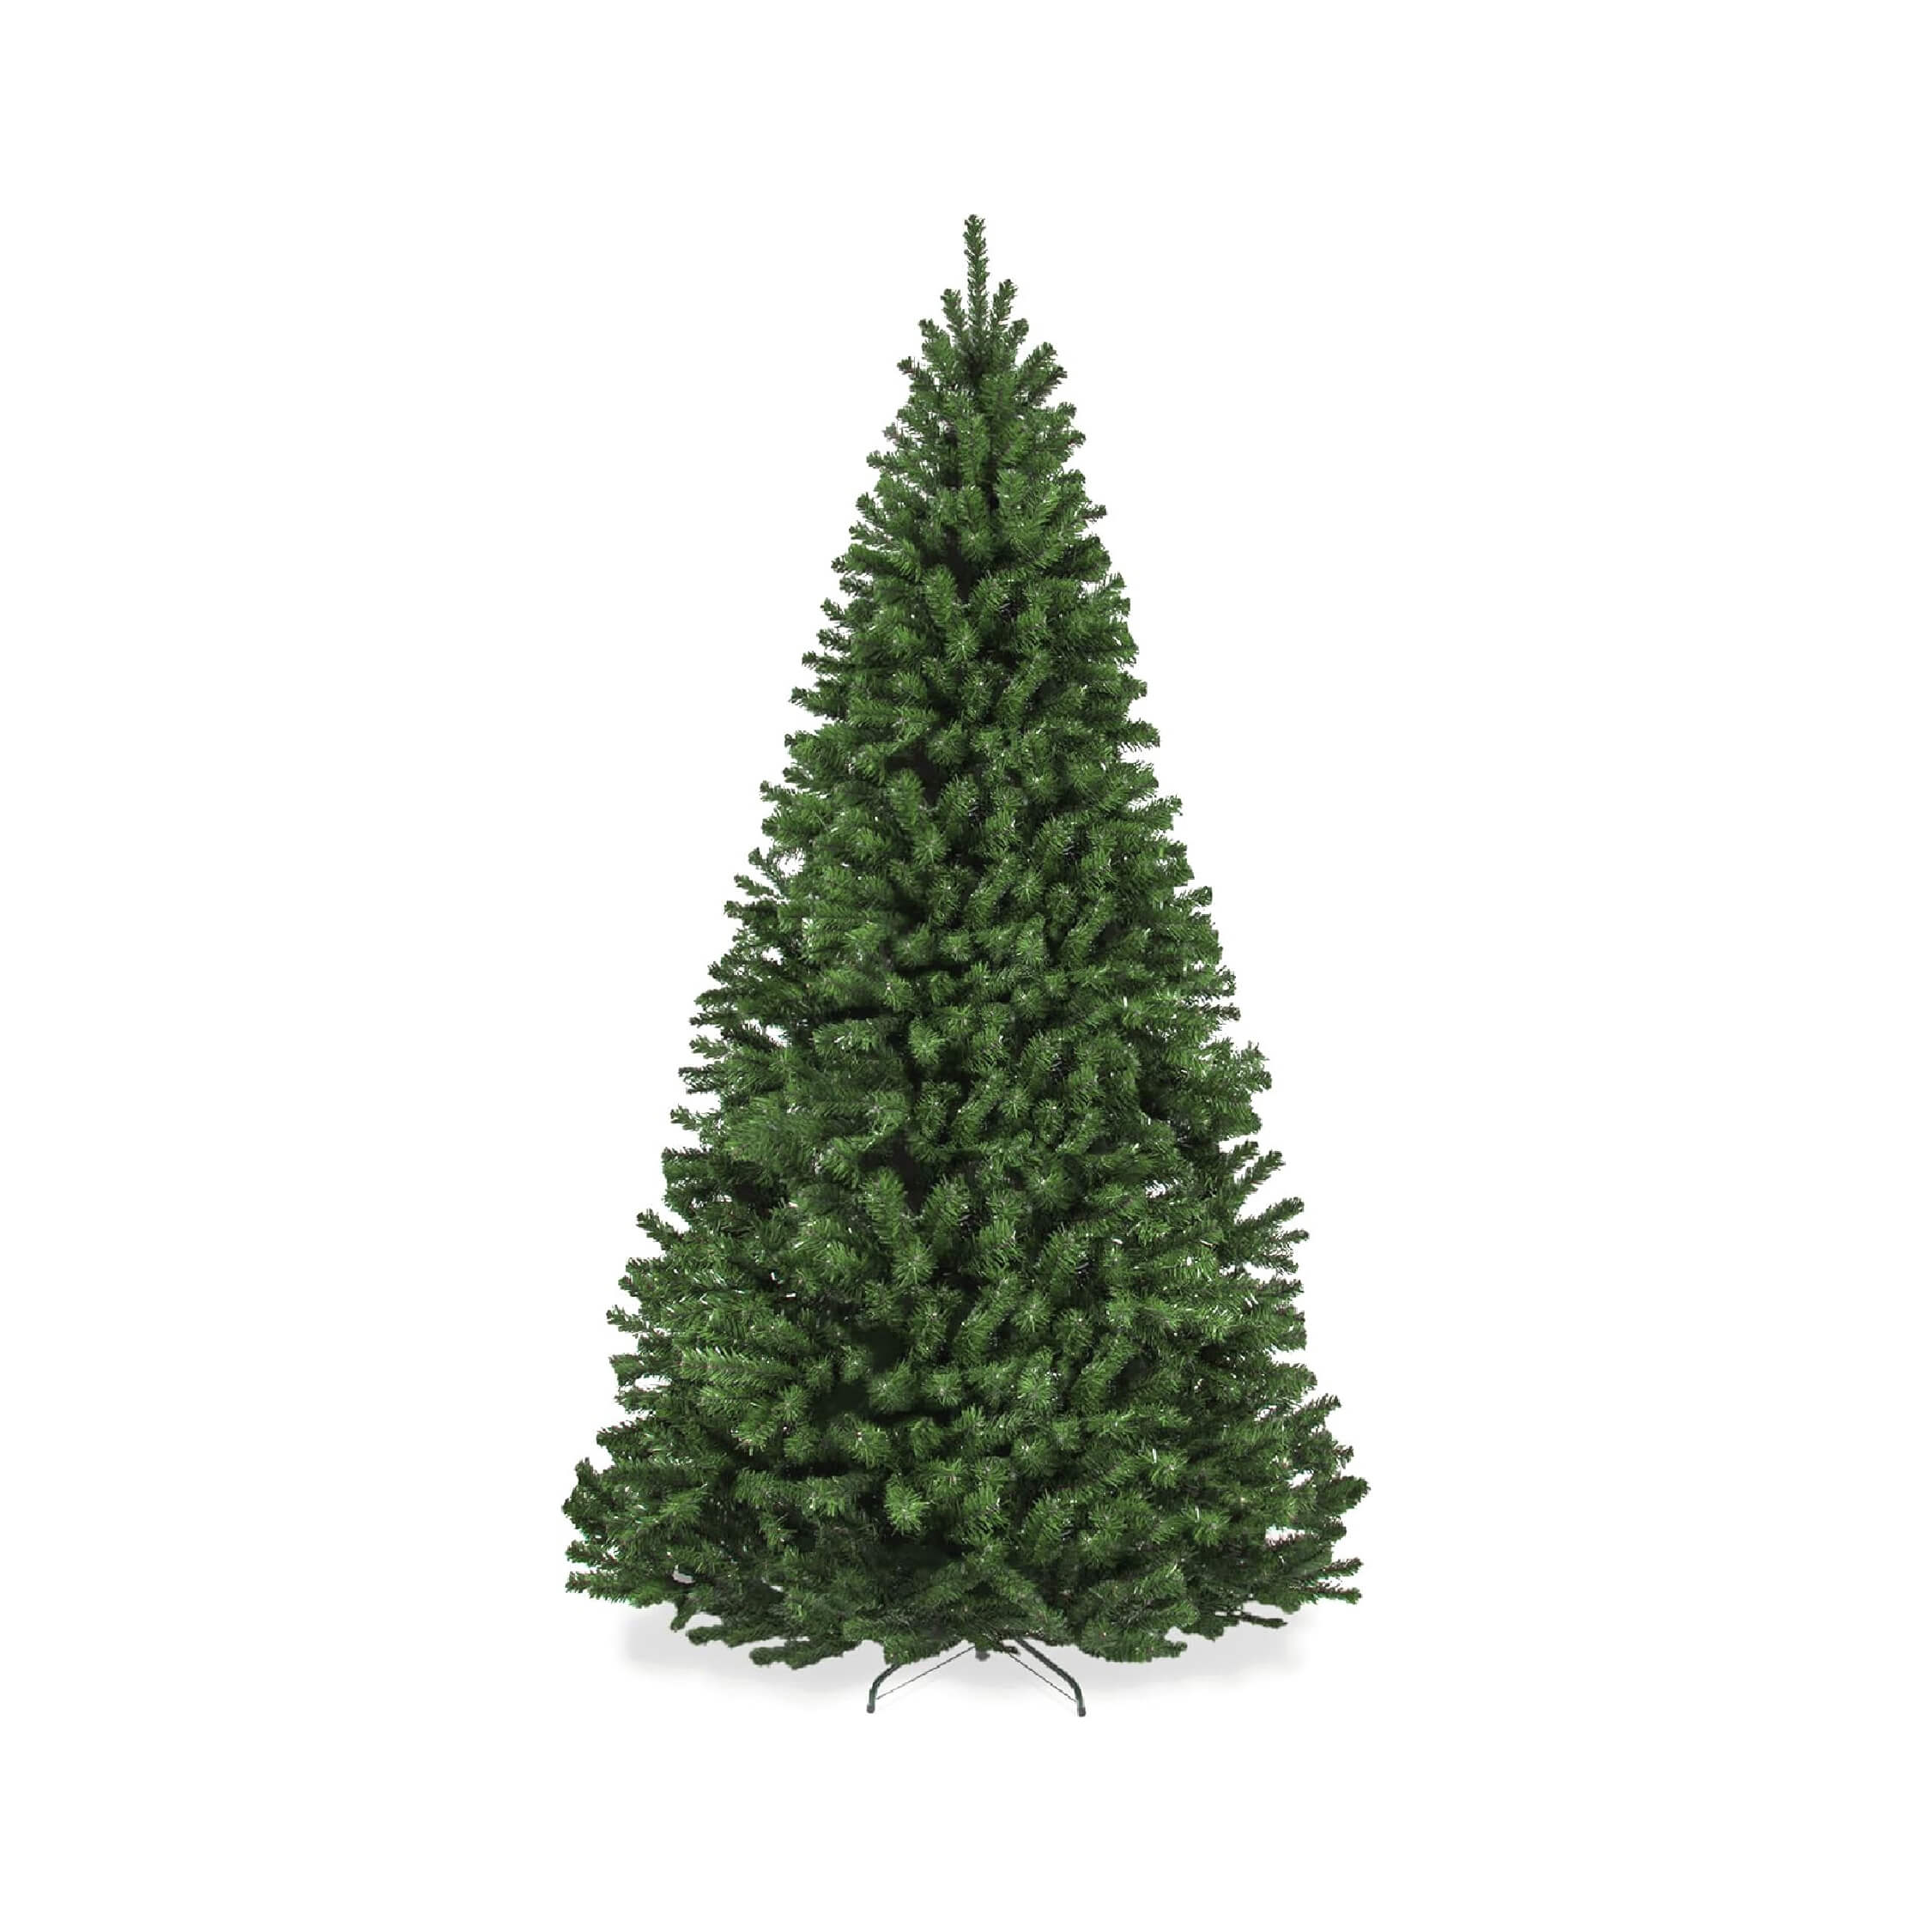 best-artificial-christmas-tree-on-amazon-premium-spruce-evergreen-no-lights-at-home-pilates-workout